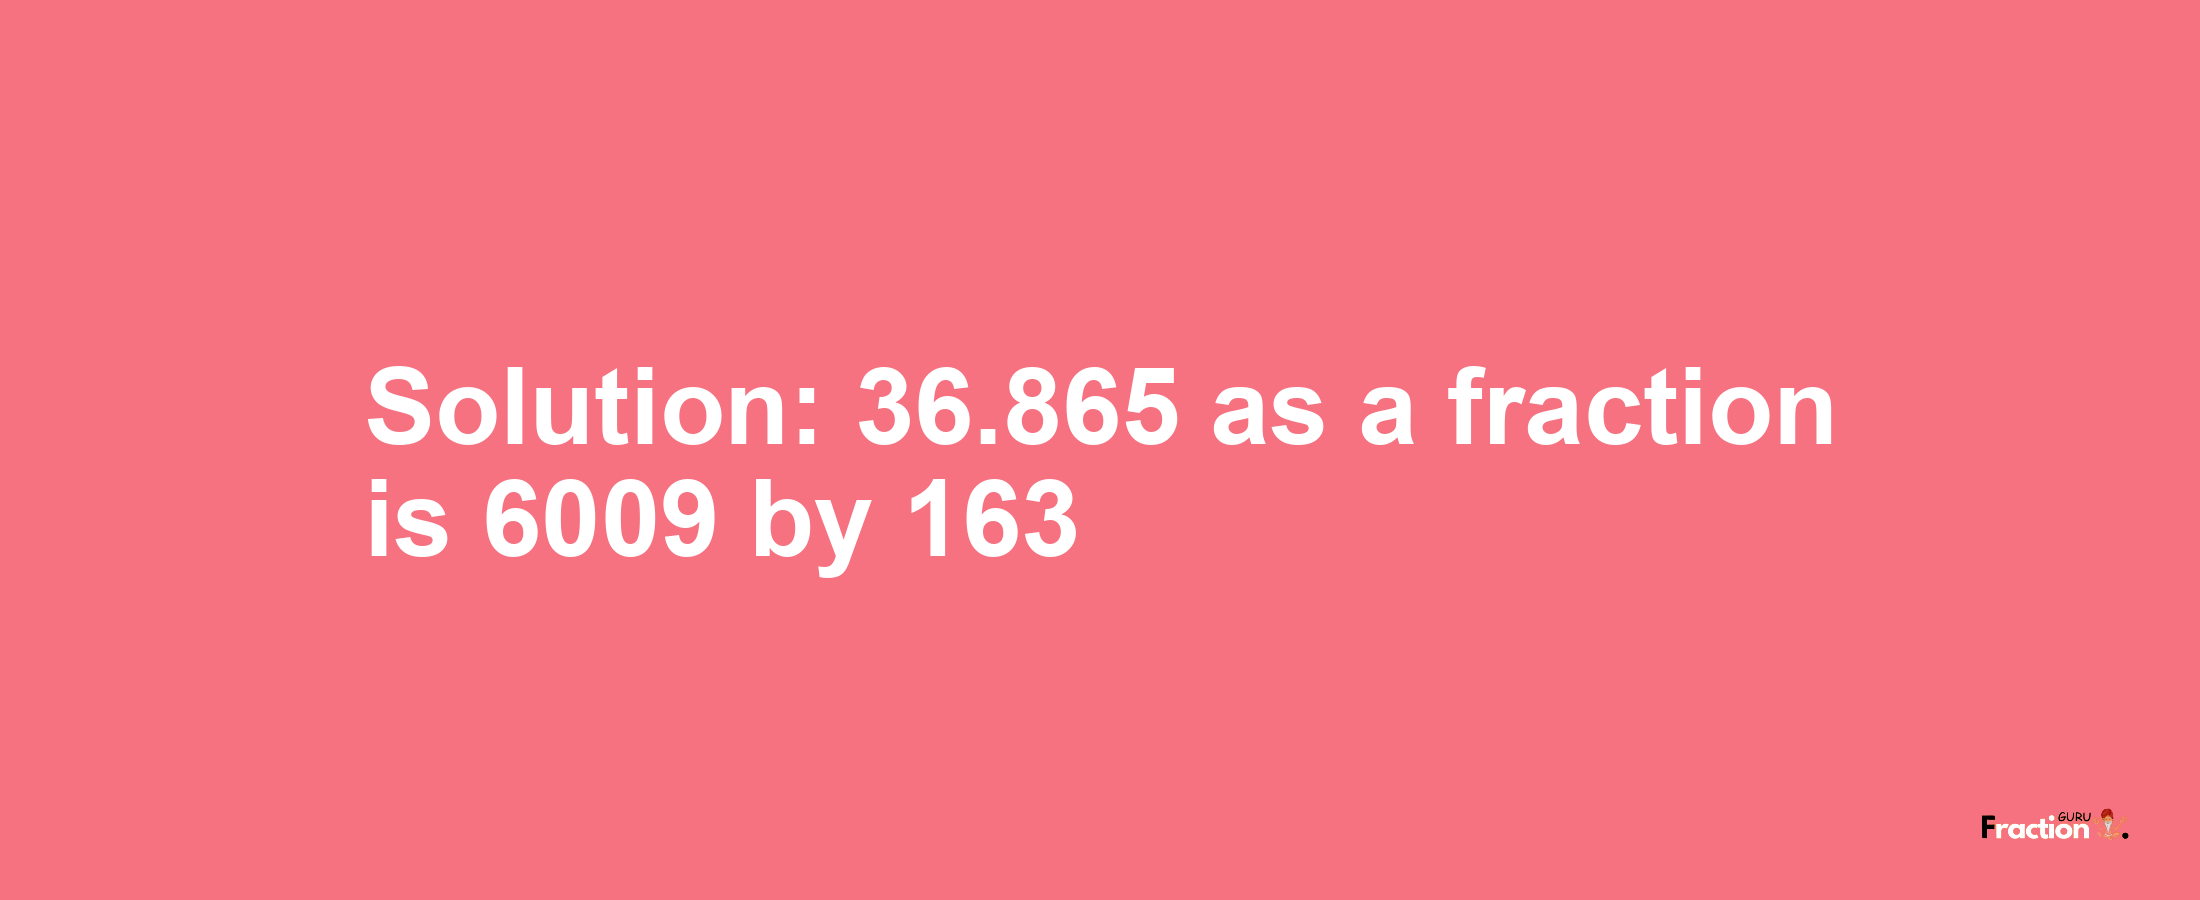 Solution:36.865 as a fraction is 6009/163